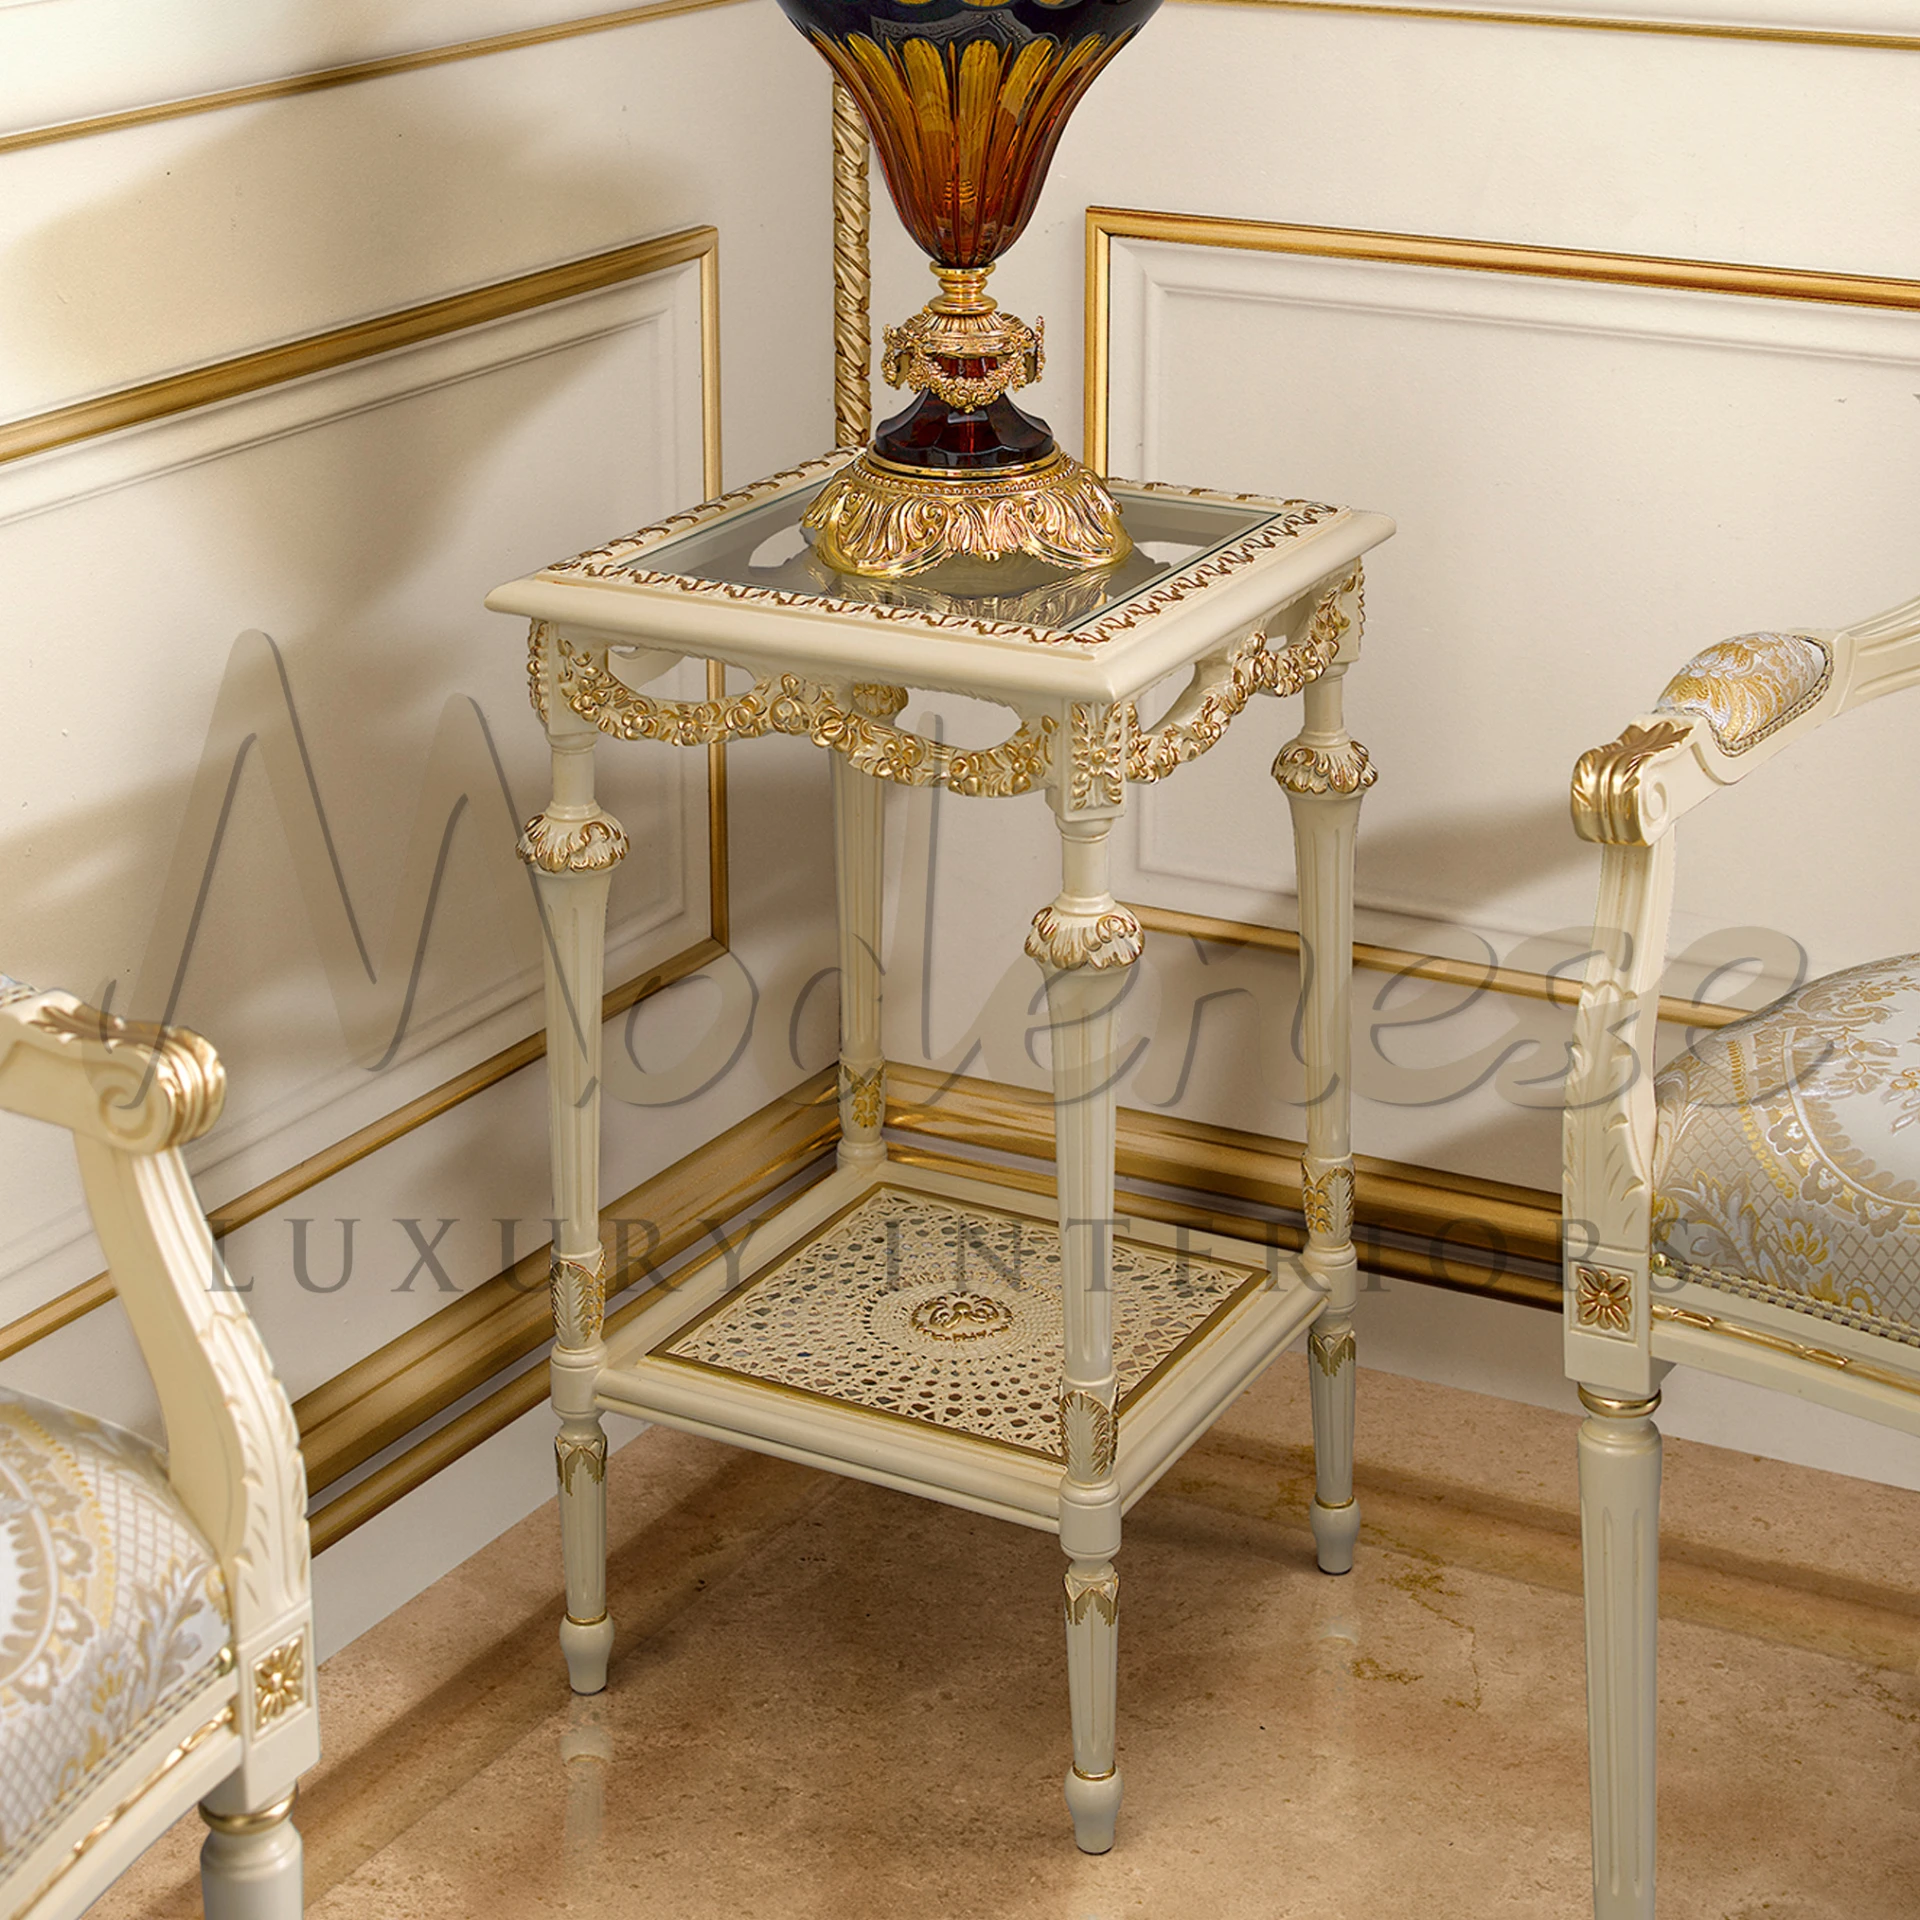 Luxury Handcrafted Side Table with gold leaf carving and a crystal top, a classic piece for sophisticated interior design.